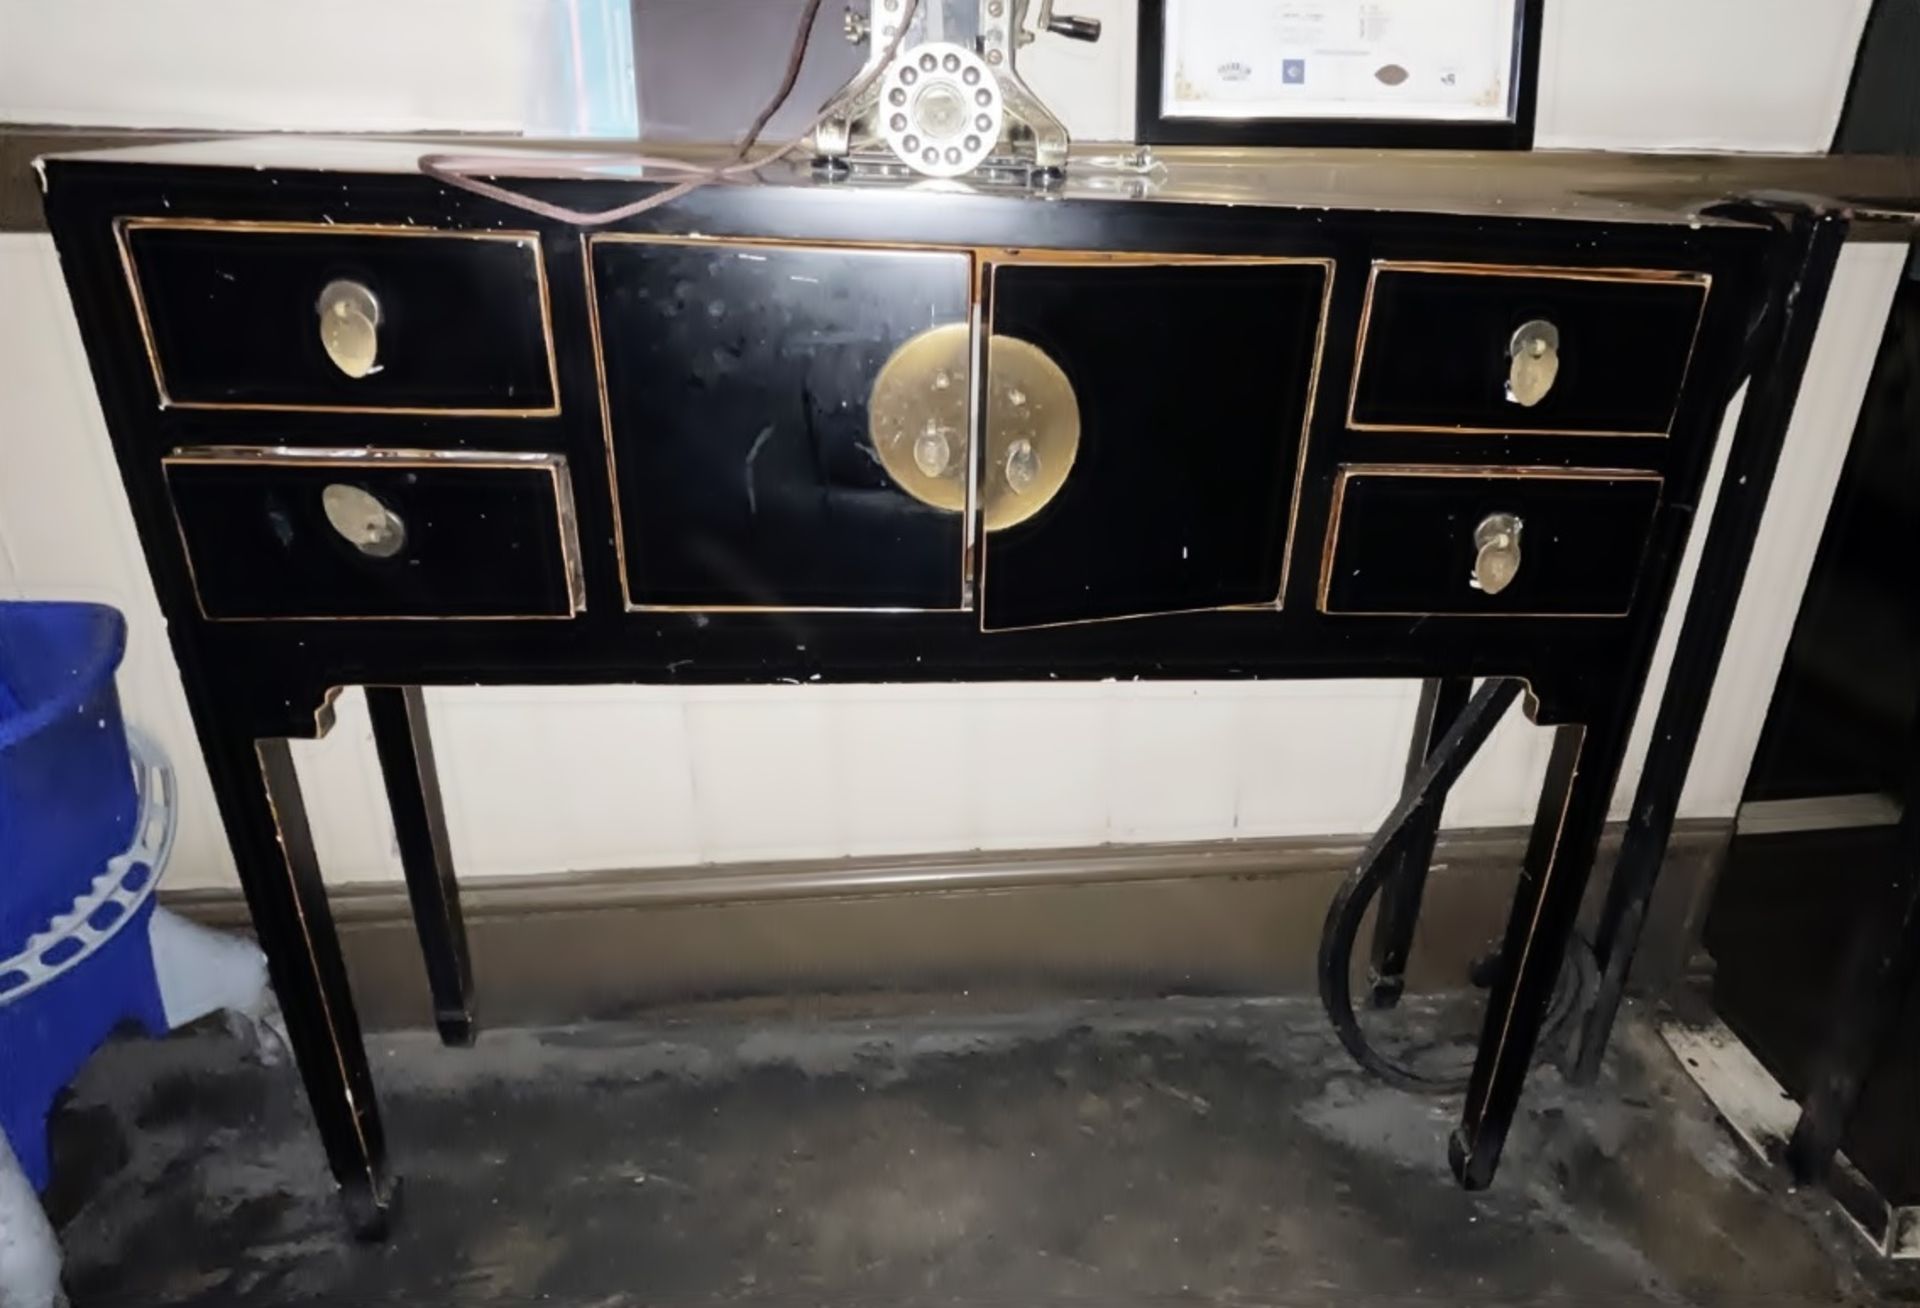 1 x Vintage-style Shanxi Inspired 2-Door 4-Drawer Hallway Consul Console Table in Black and Brass - Image 2 of 4